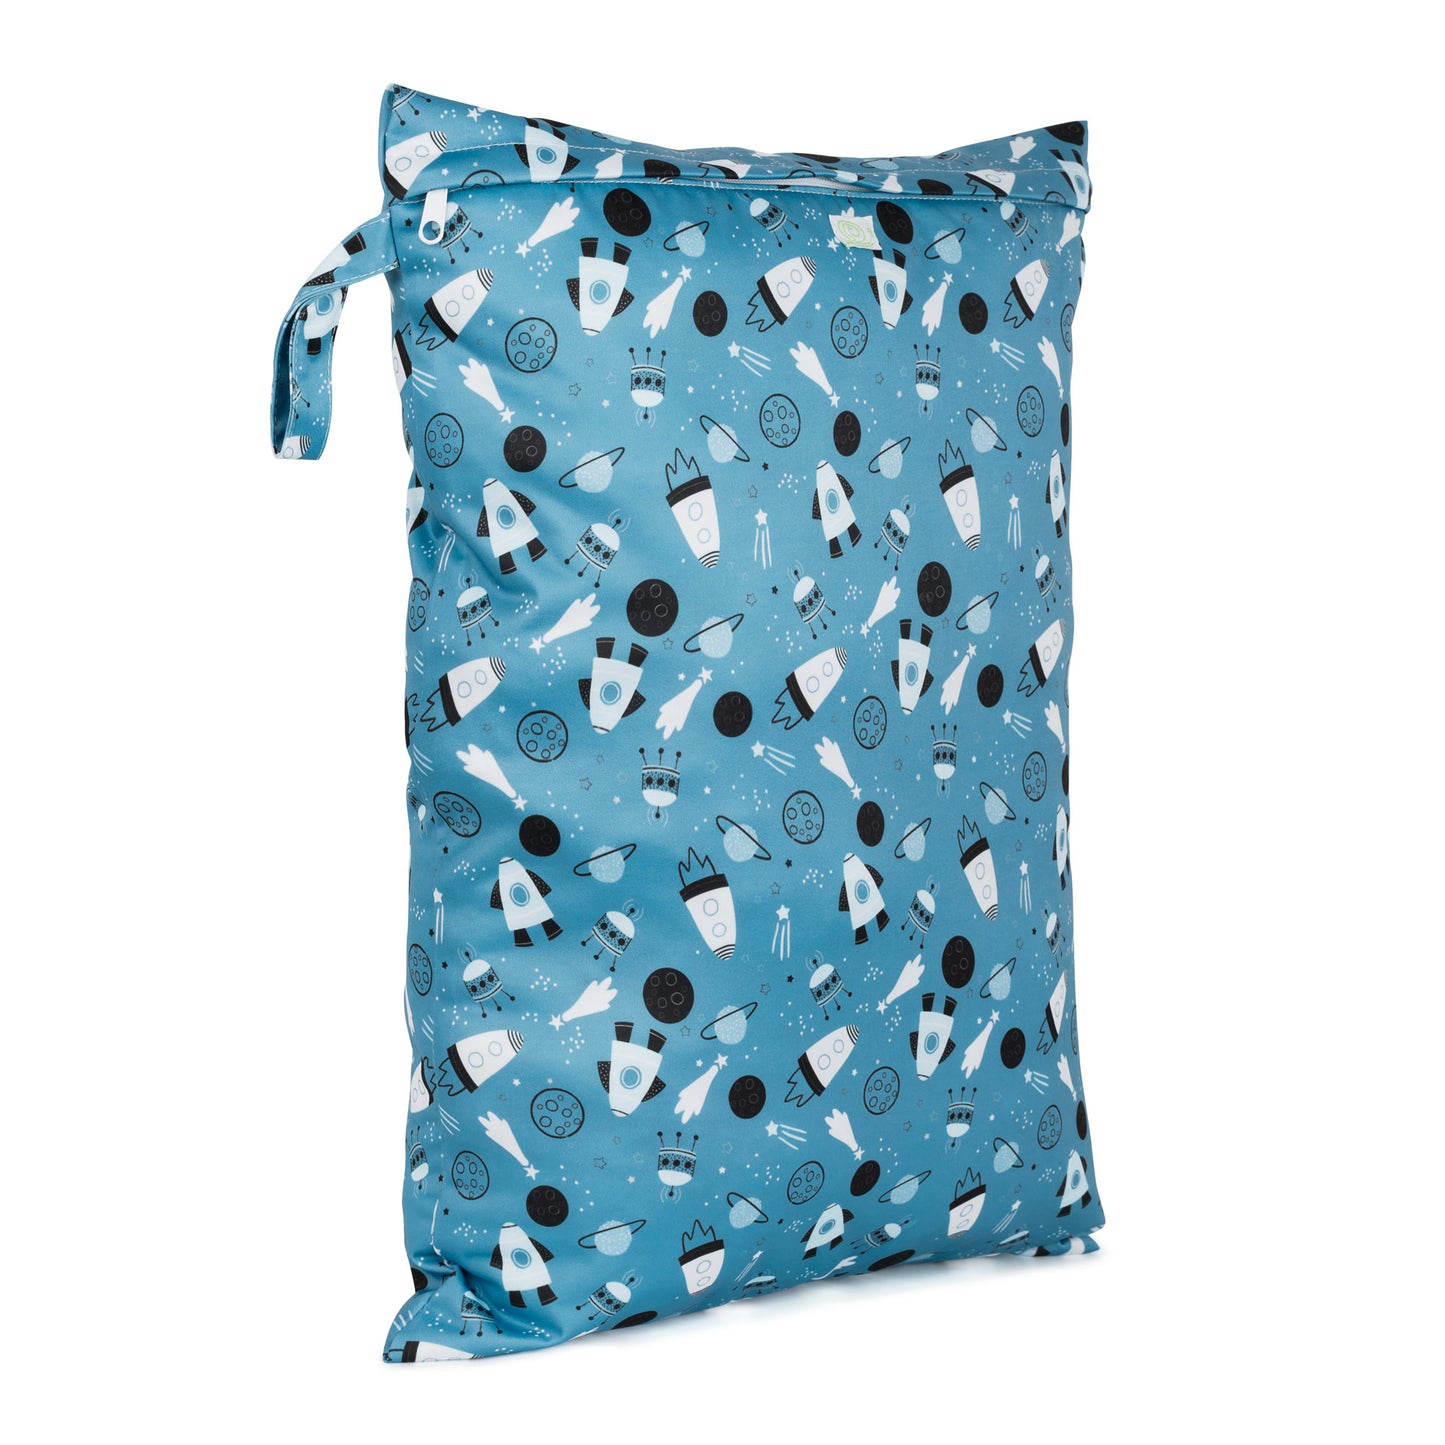 Blue Shoot For The Moon Space Rocket Large Reusable Nappy Wet Bag